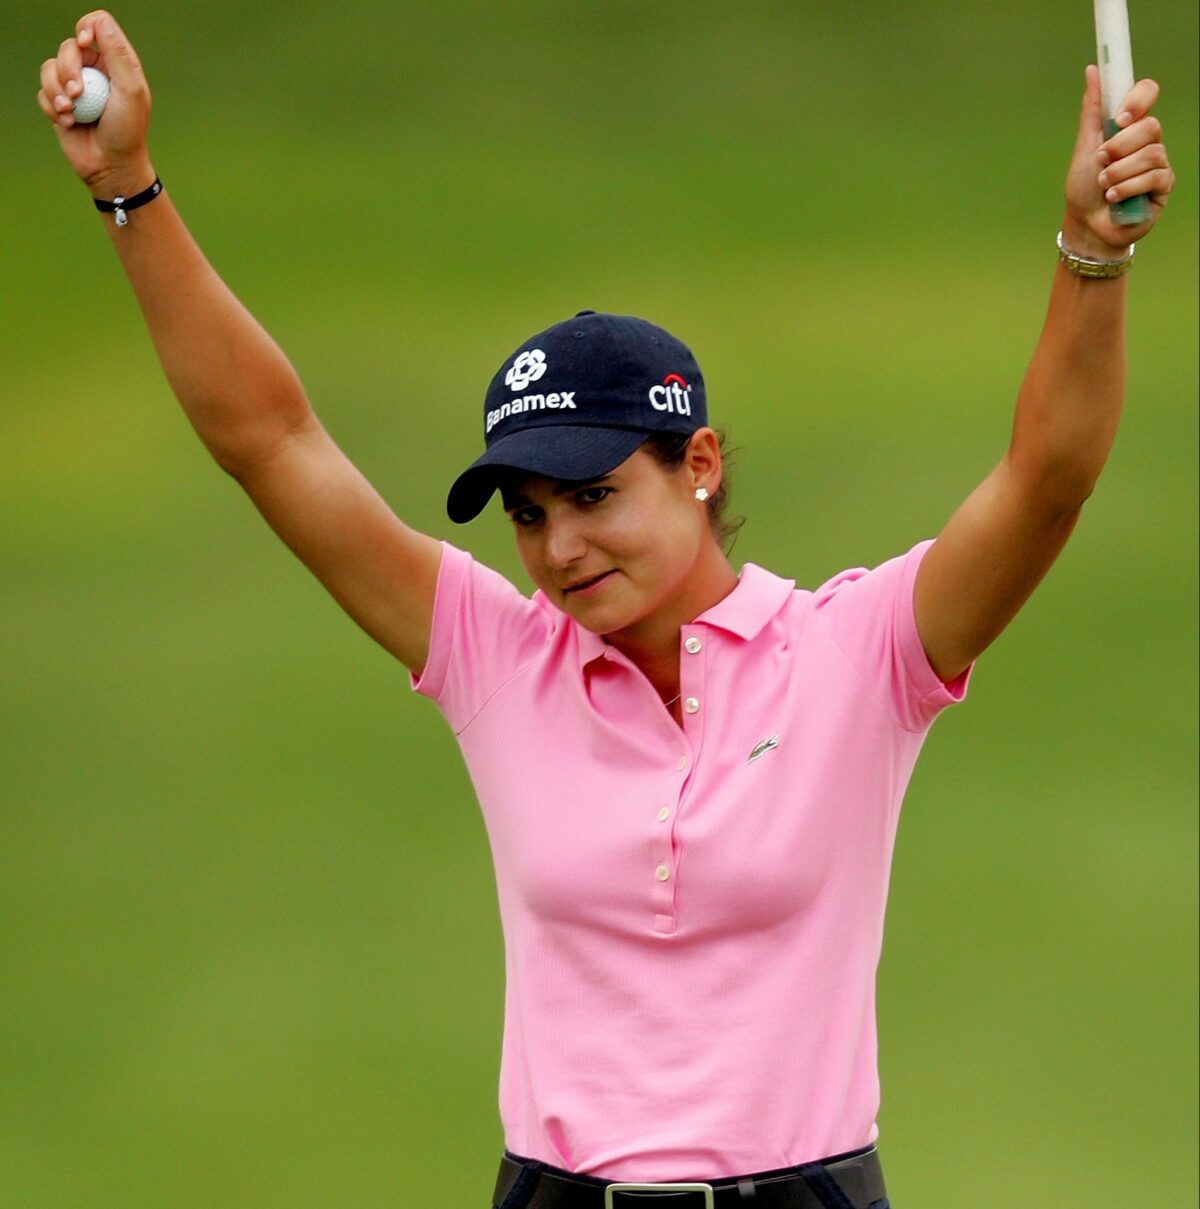 Here are the 27 times in LPGA history a player has made $2 million or more in a season